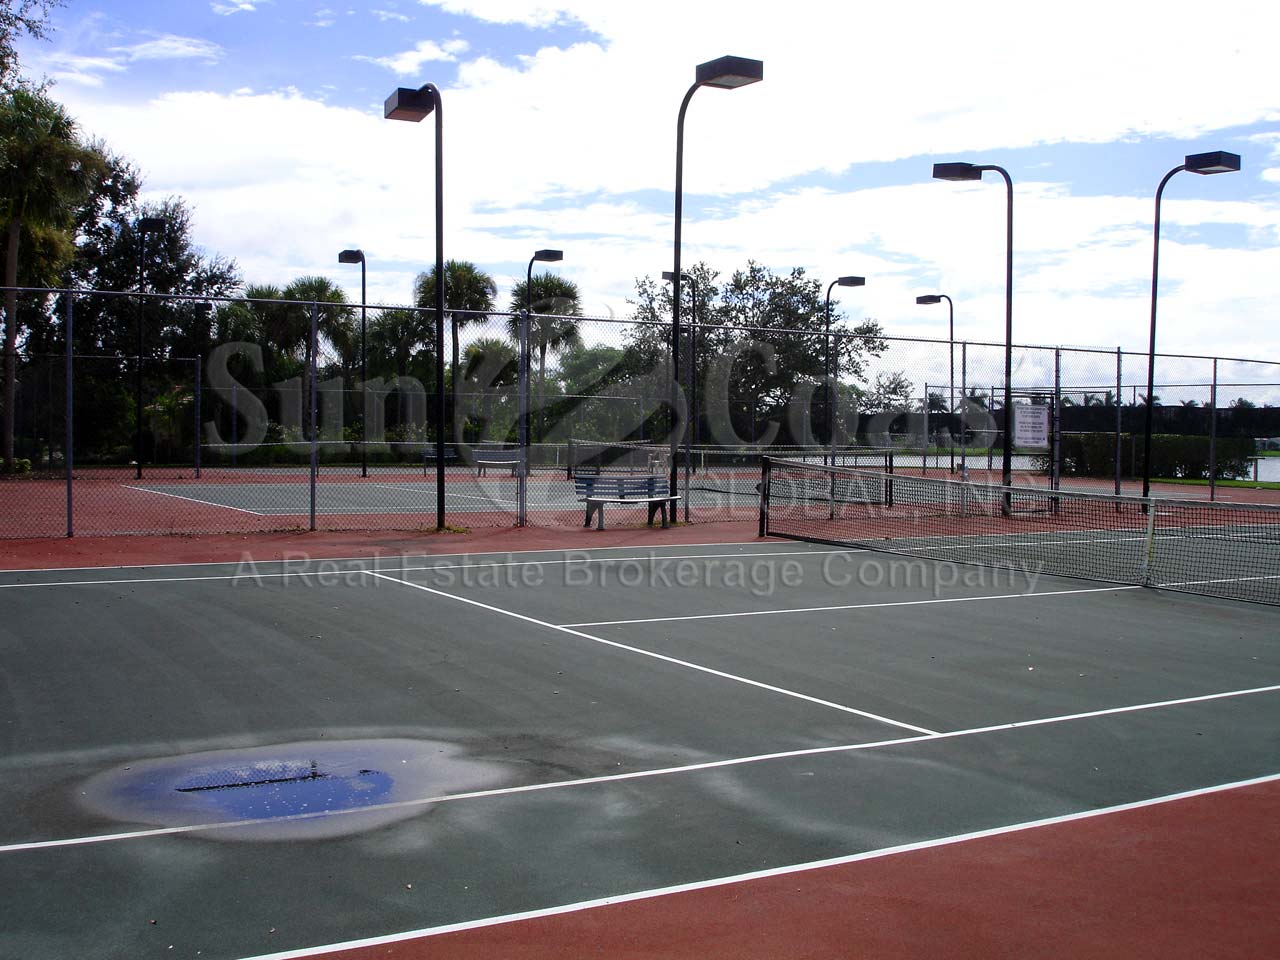 EMERALD LAKES Tennis Courts